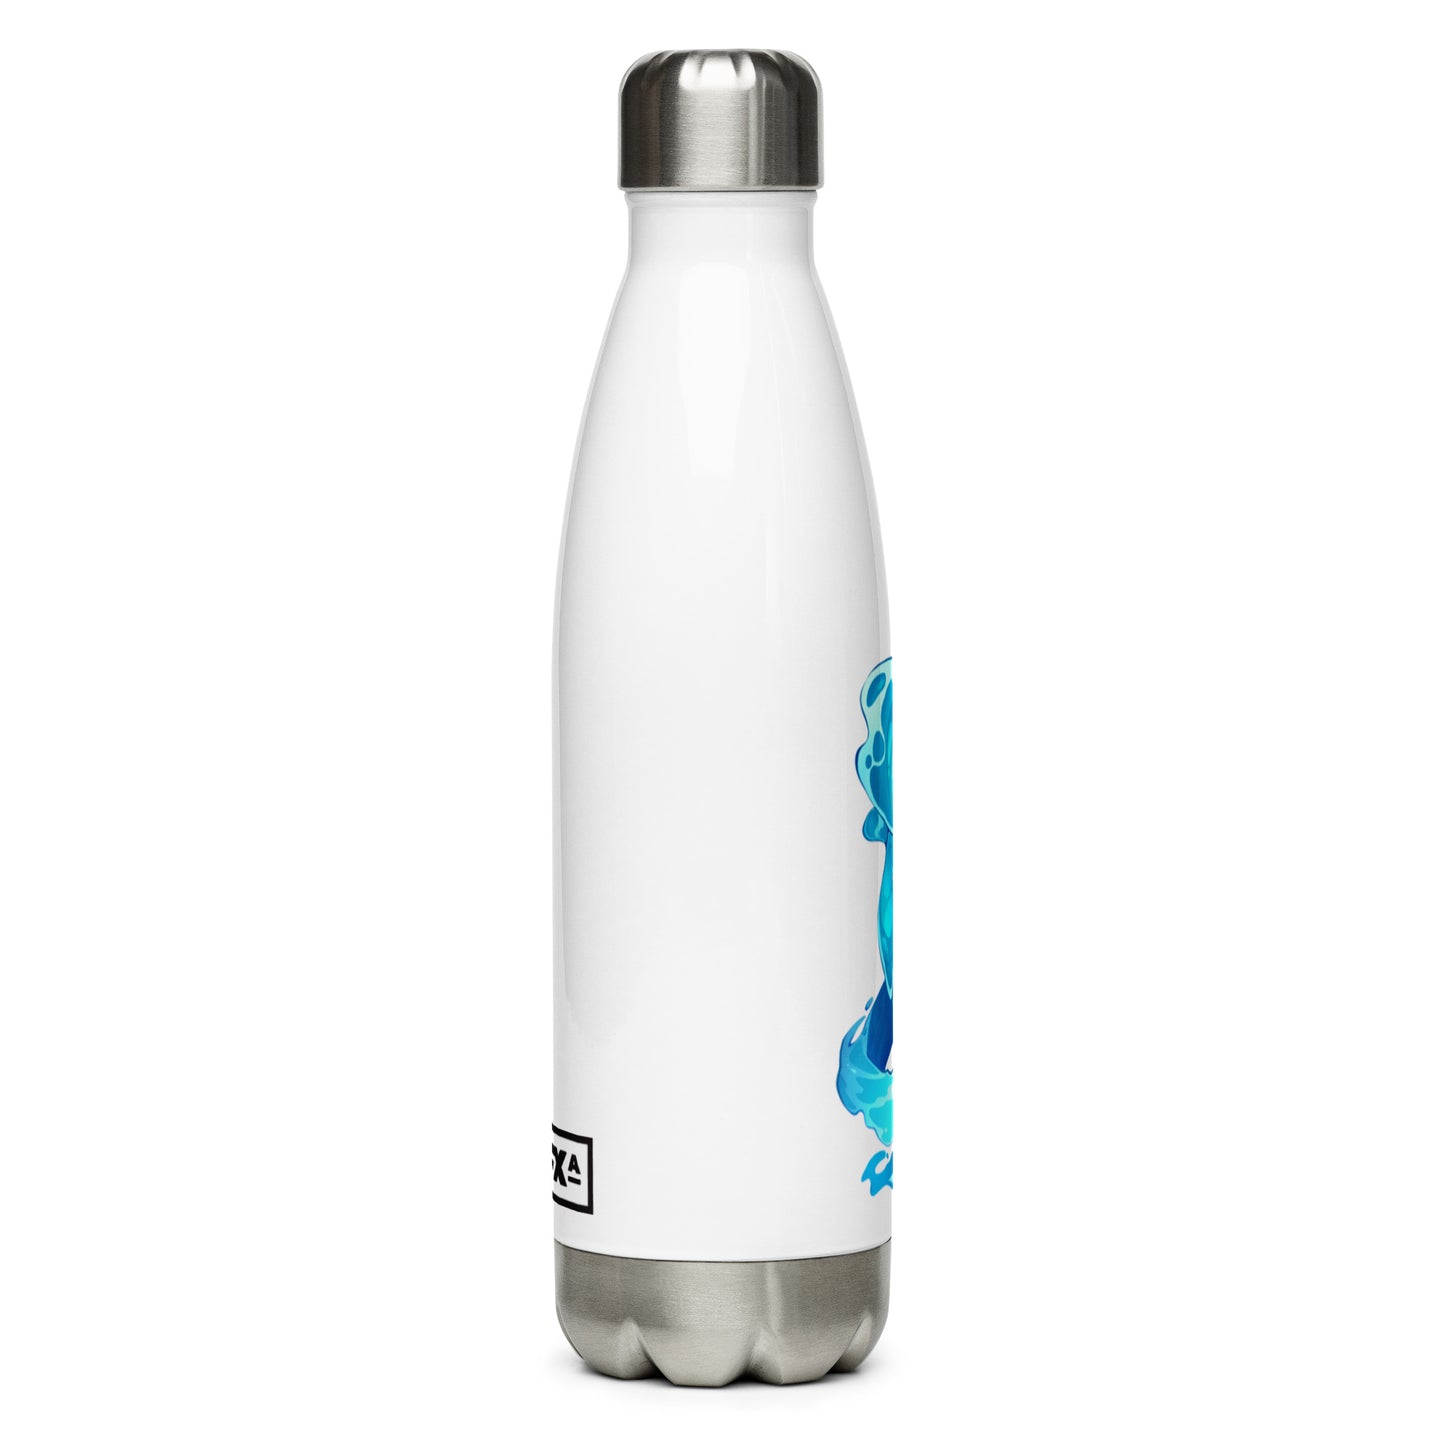 Stainless Steel Water Bottle: Aquanna